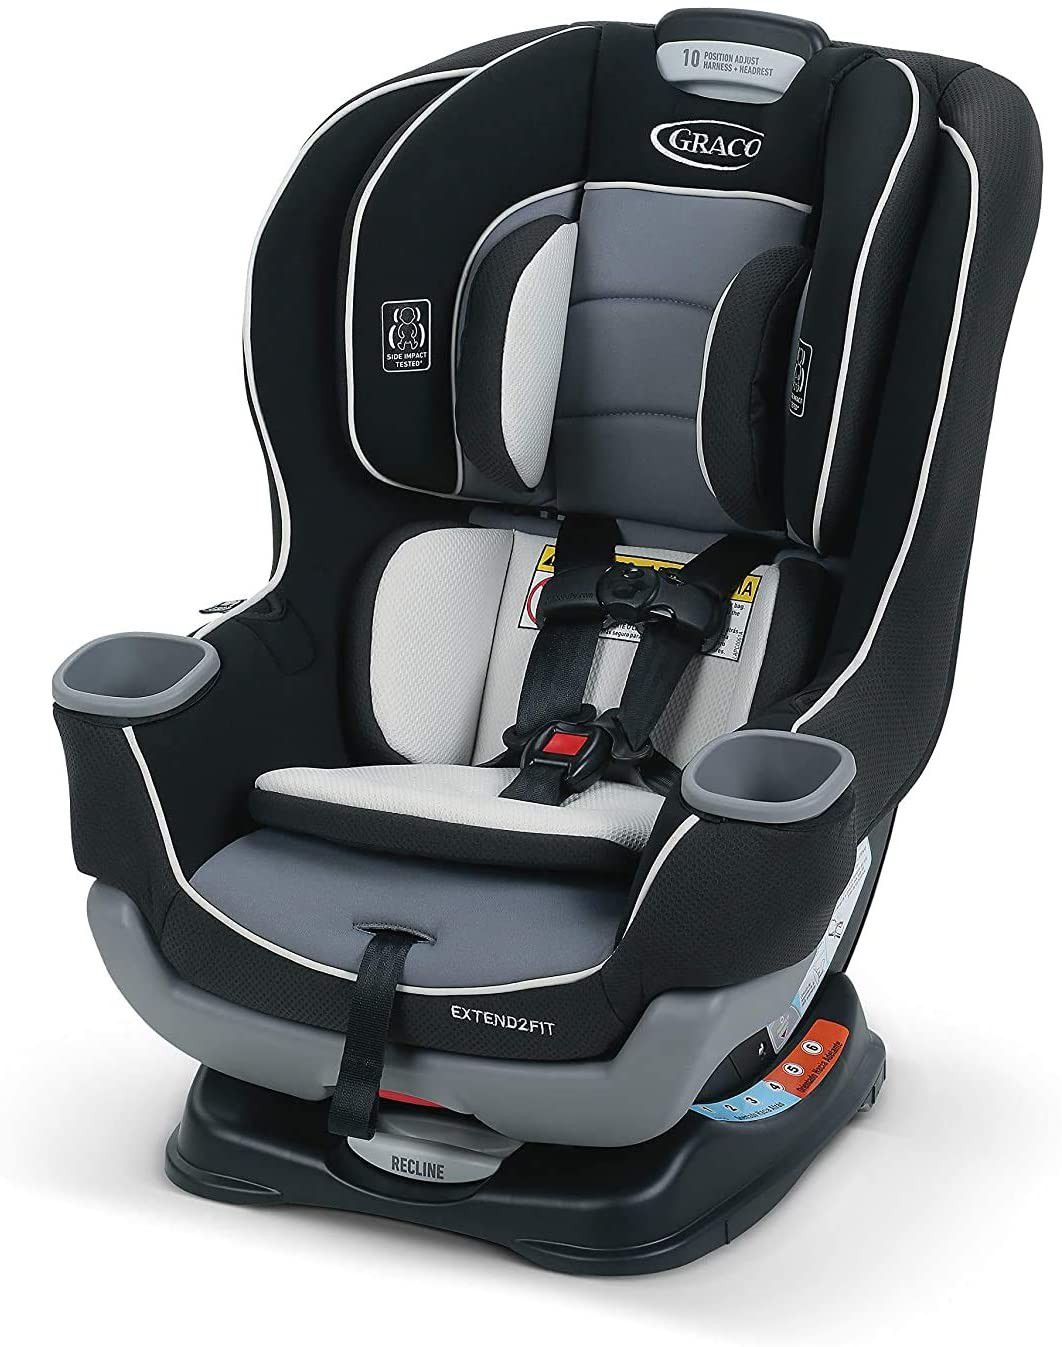 2-in-1 Convertible Car Seat in Gotham for Kids Traveling Use